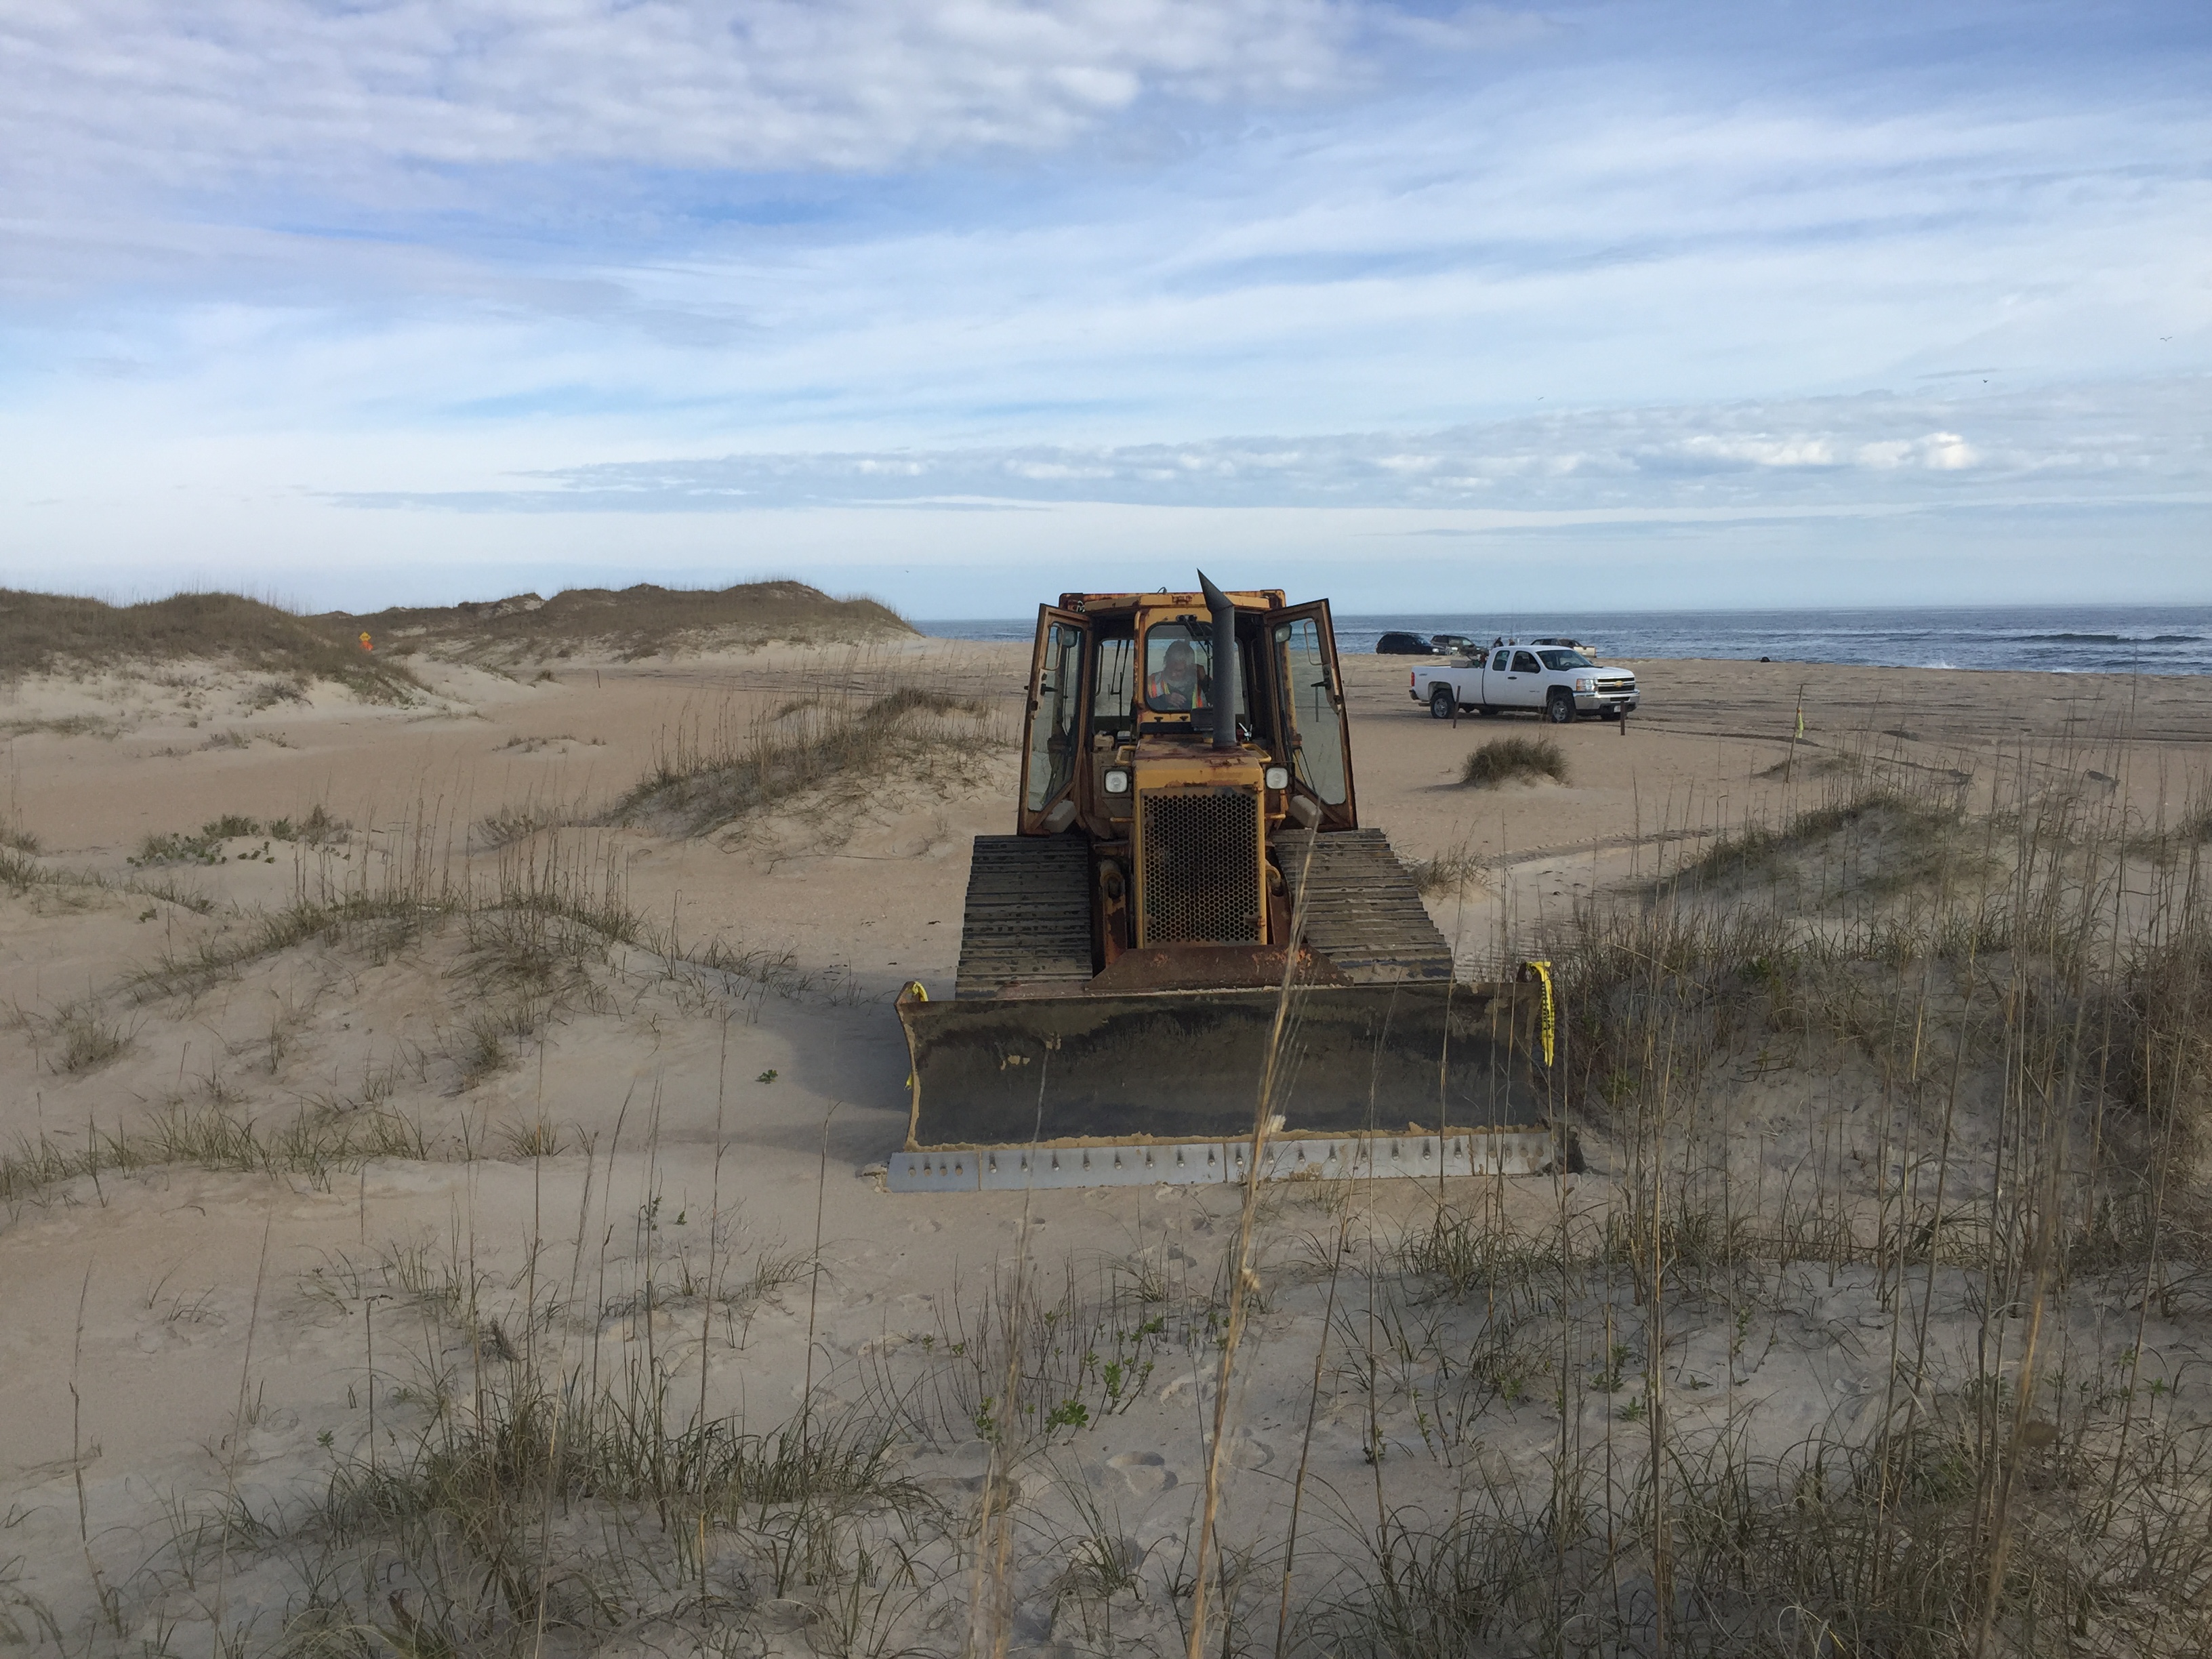 Bulldozer beginning work on Cape Point bypass extension. Park Ranger vehicle and Atlantic Ocean in background.